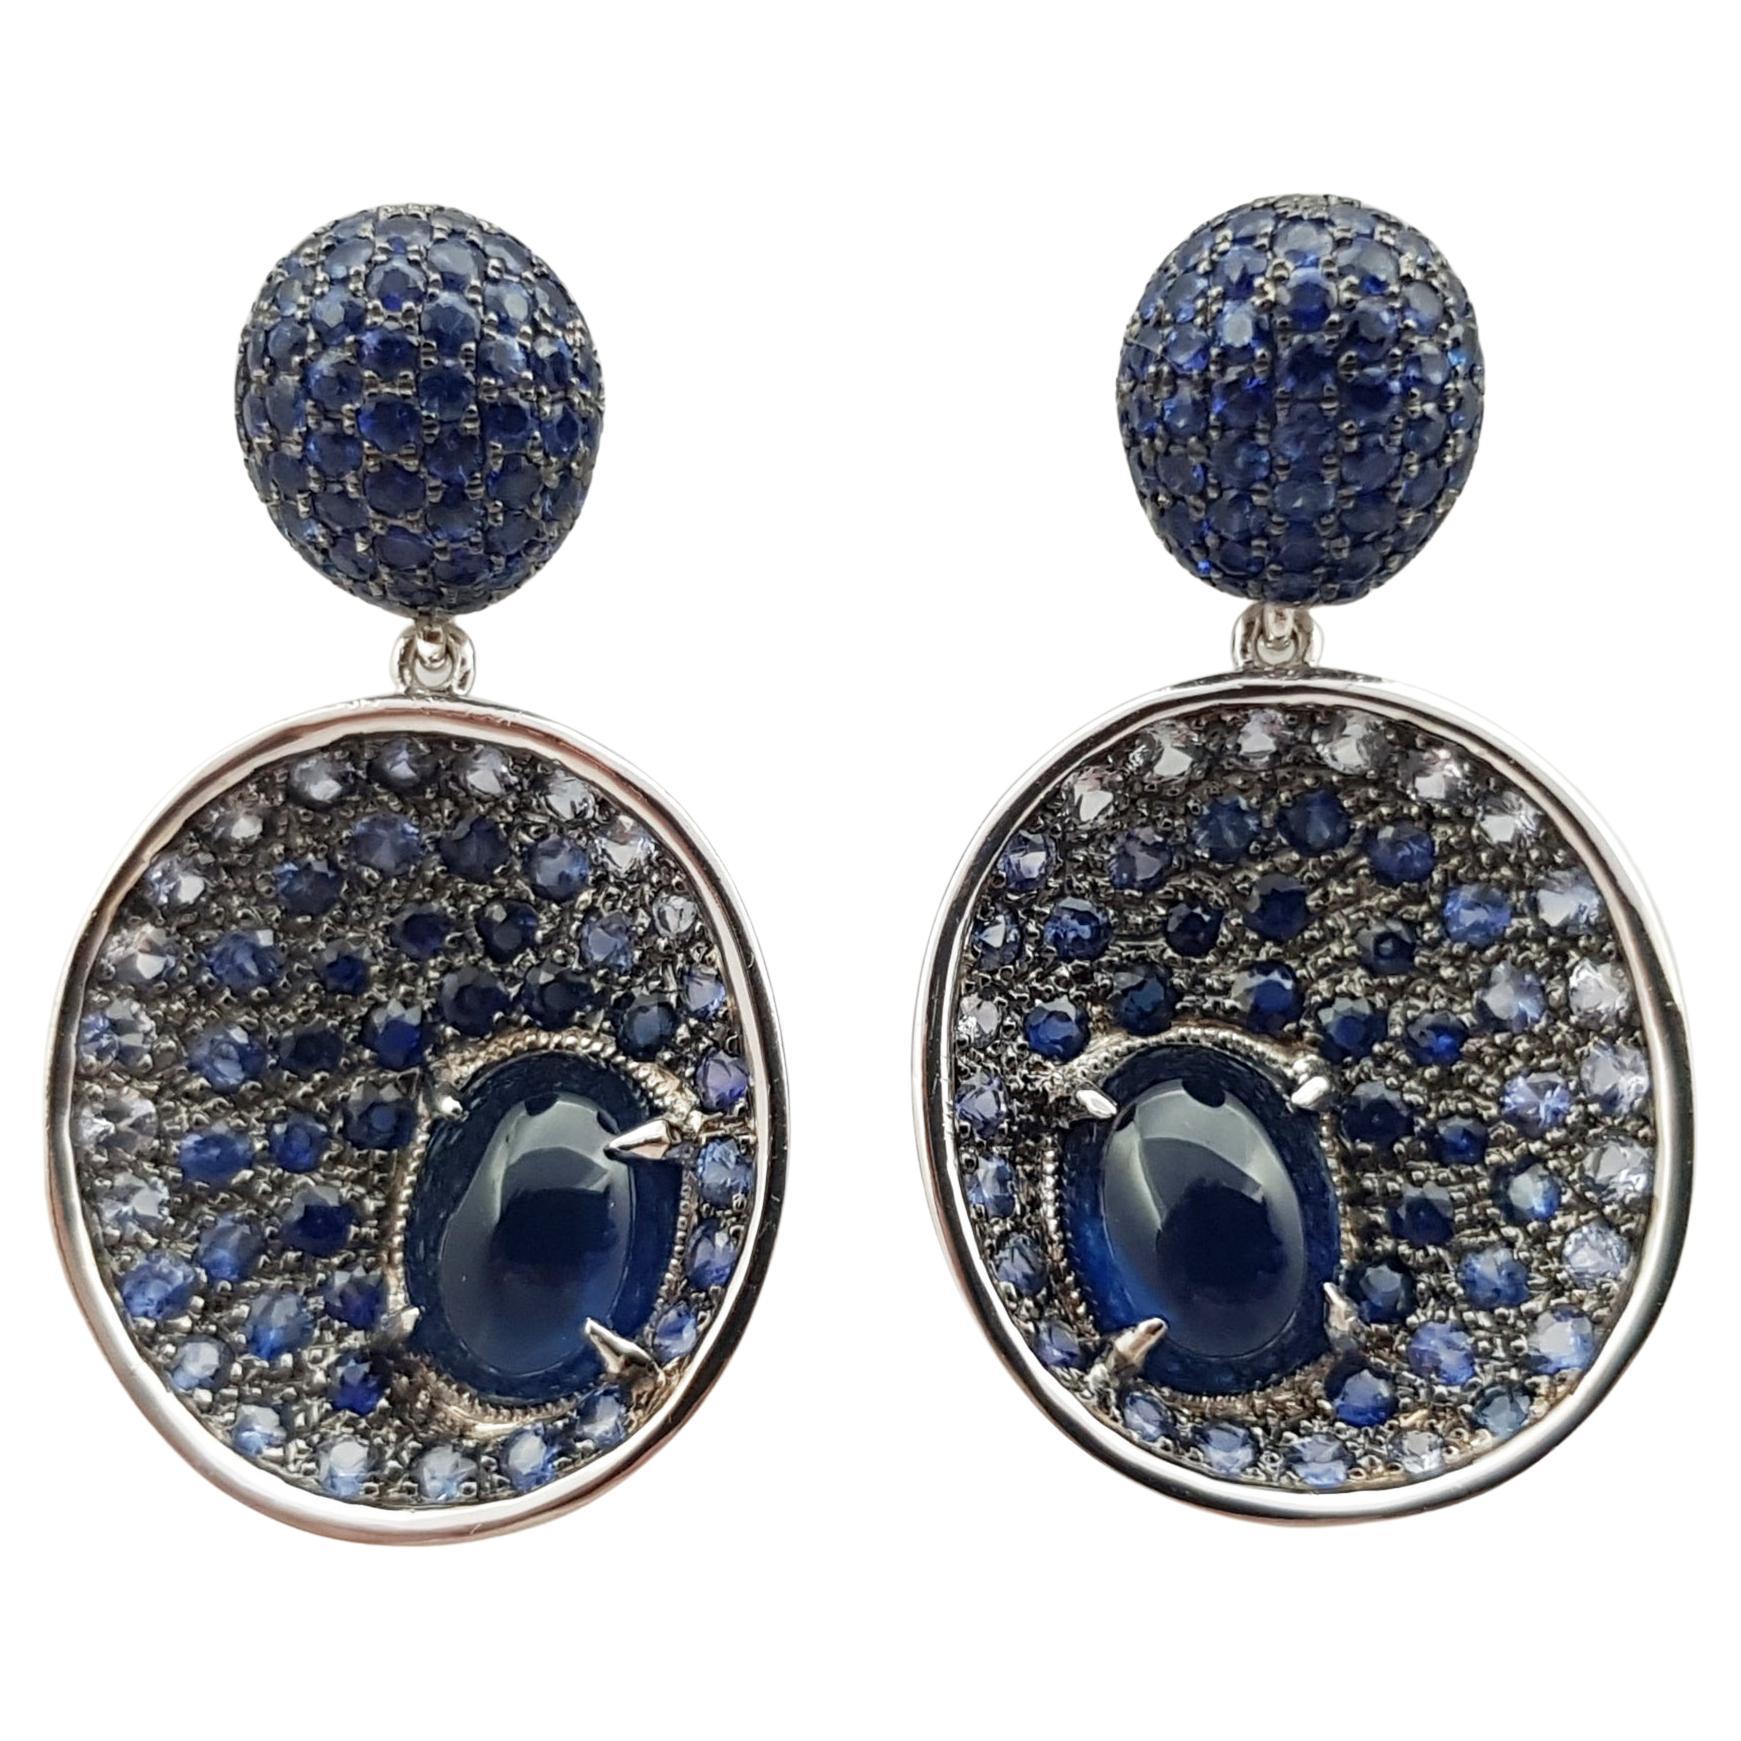 Cabochon Blue Sapphire with Blue Sapphire Earrings Set in 18 Karat White Gold